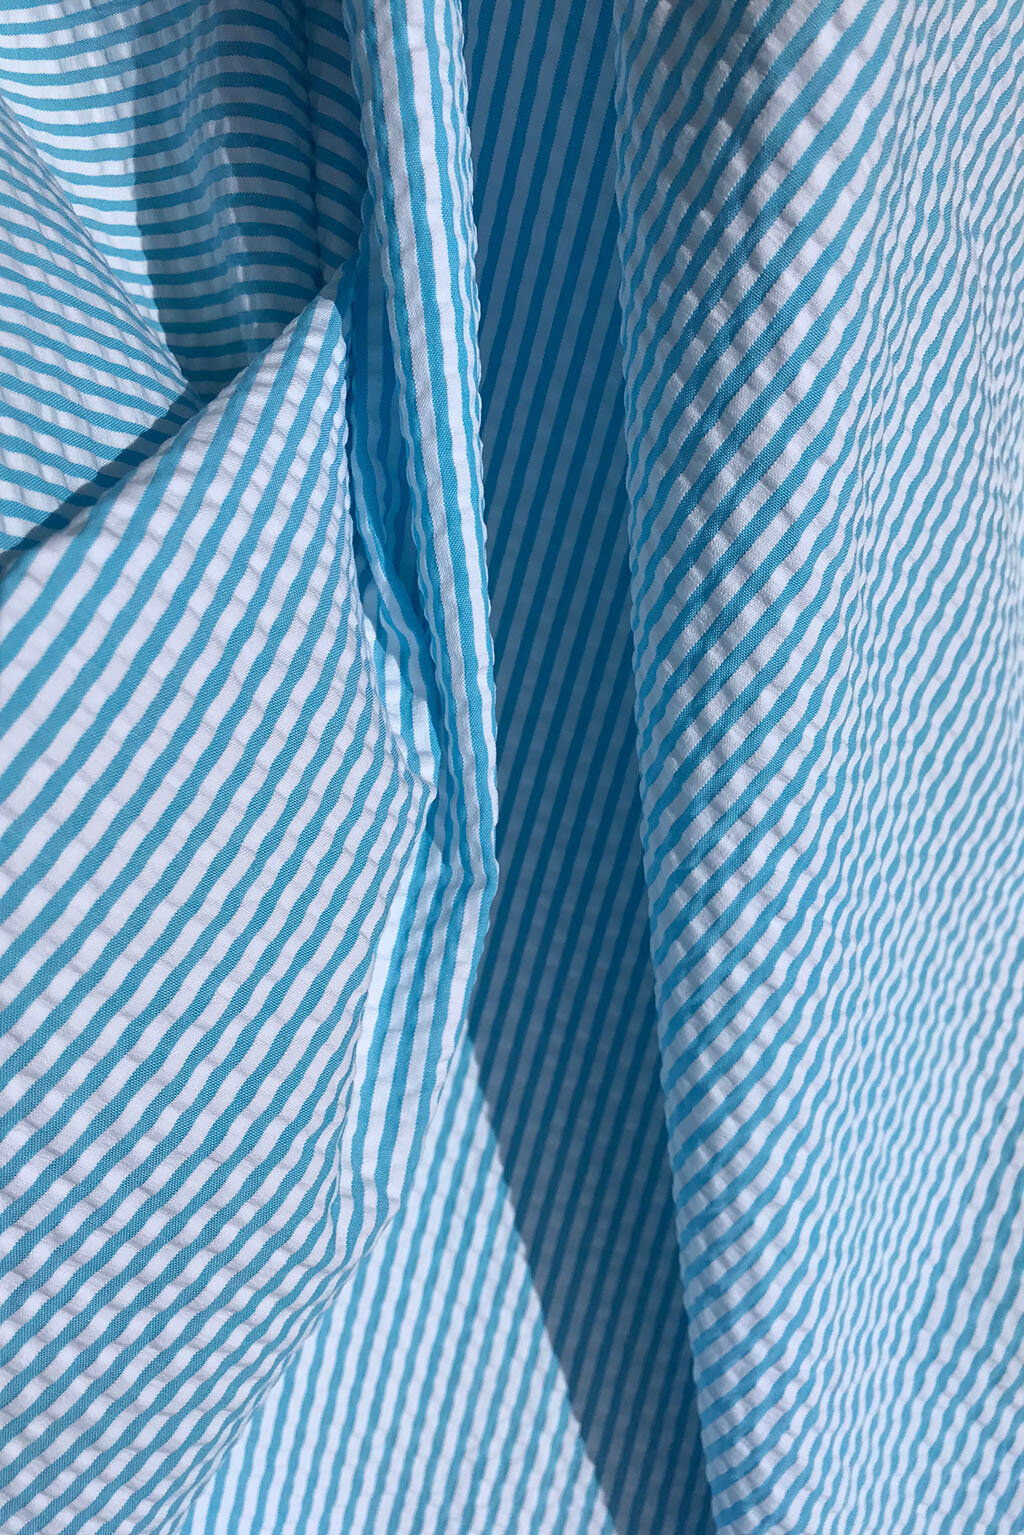 Seersucker cotton in turquoise and white — Fabrics at Play